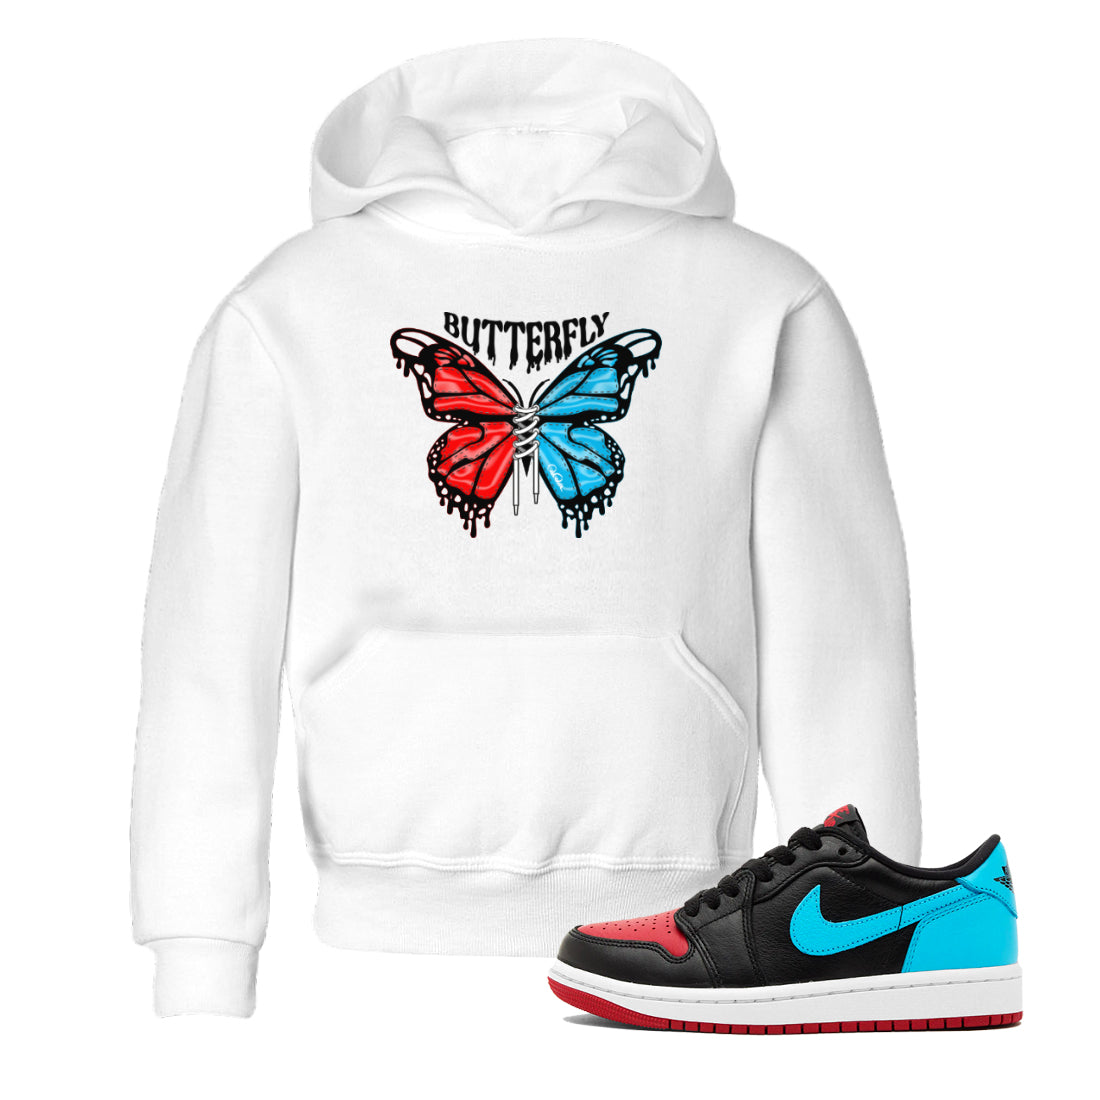 Air Jordan 1 UNC to Chicago Sneaker Match Tees Butterfly Streetwear Sneaker Shirt AJ1 UNC to Chicago Sneaker Release Tees Kids Shirts White 1